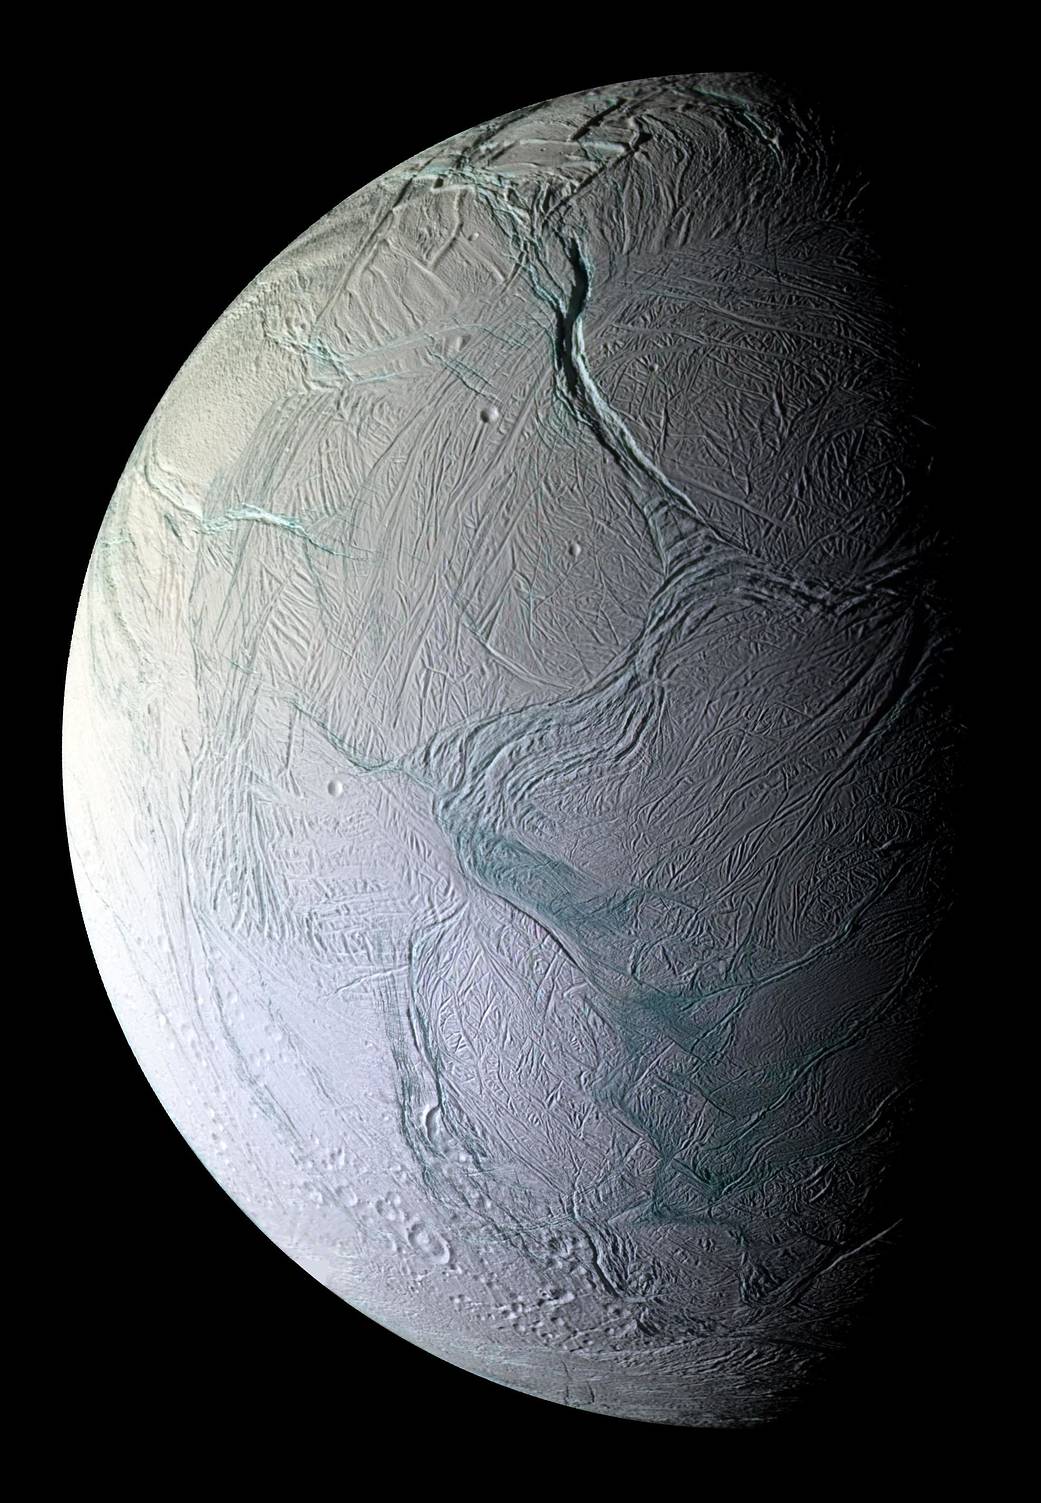 View in black and whilte of half of the moon Enceladus as the other half recedes into shadow